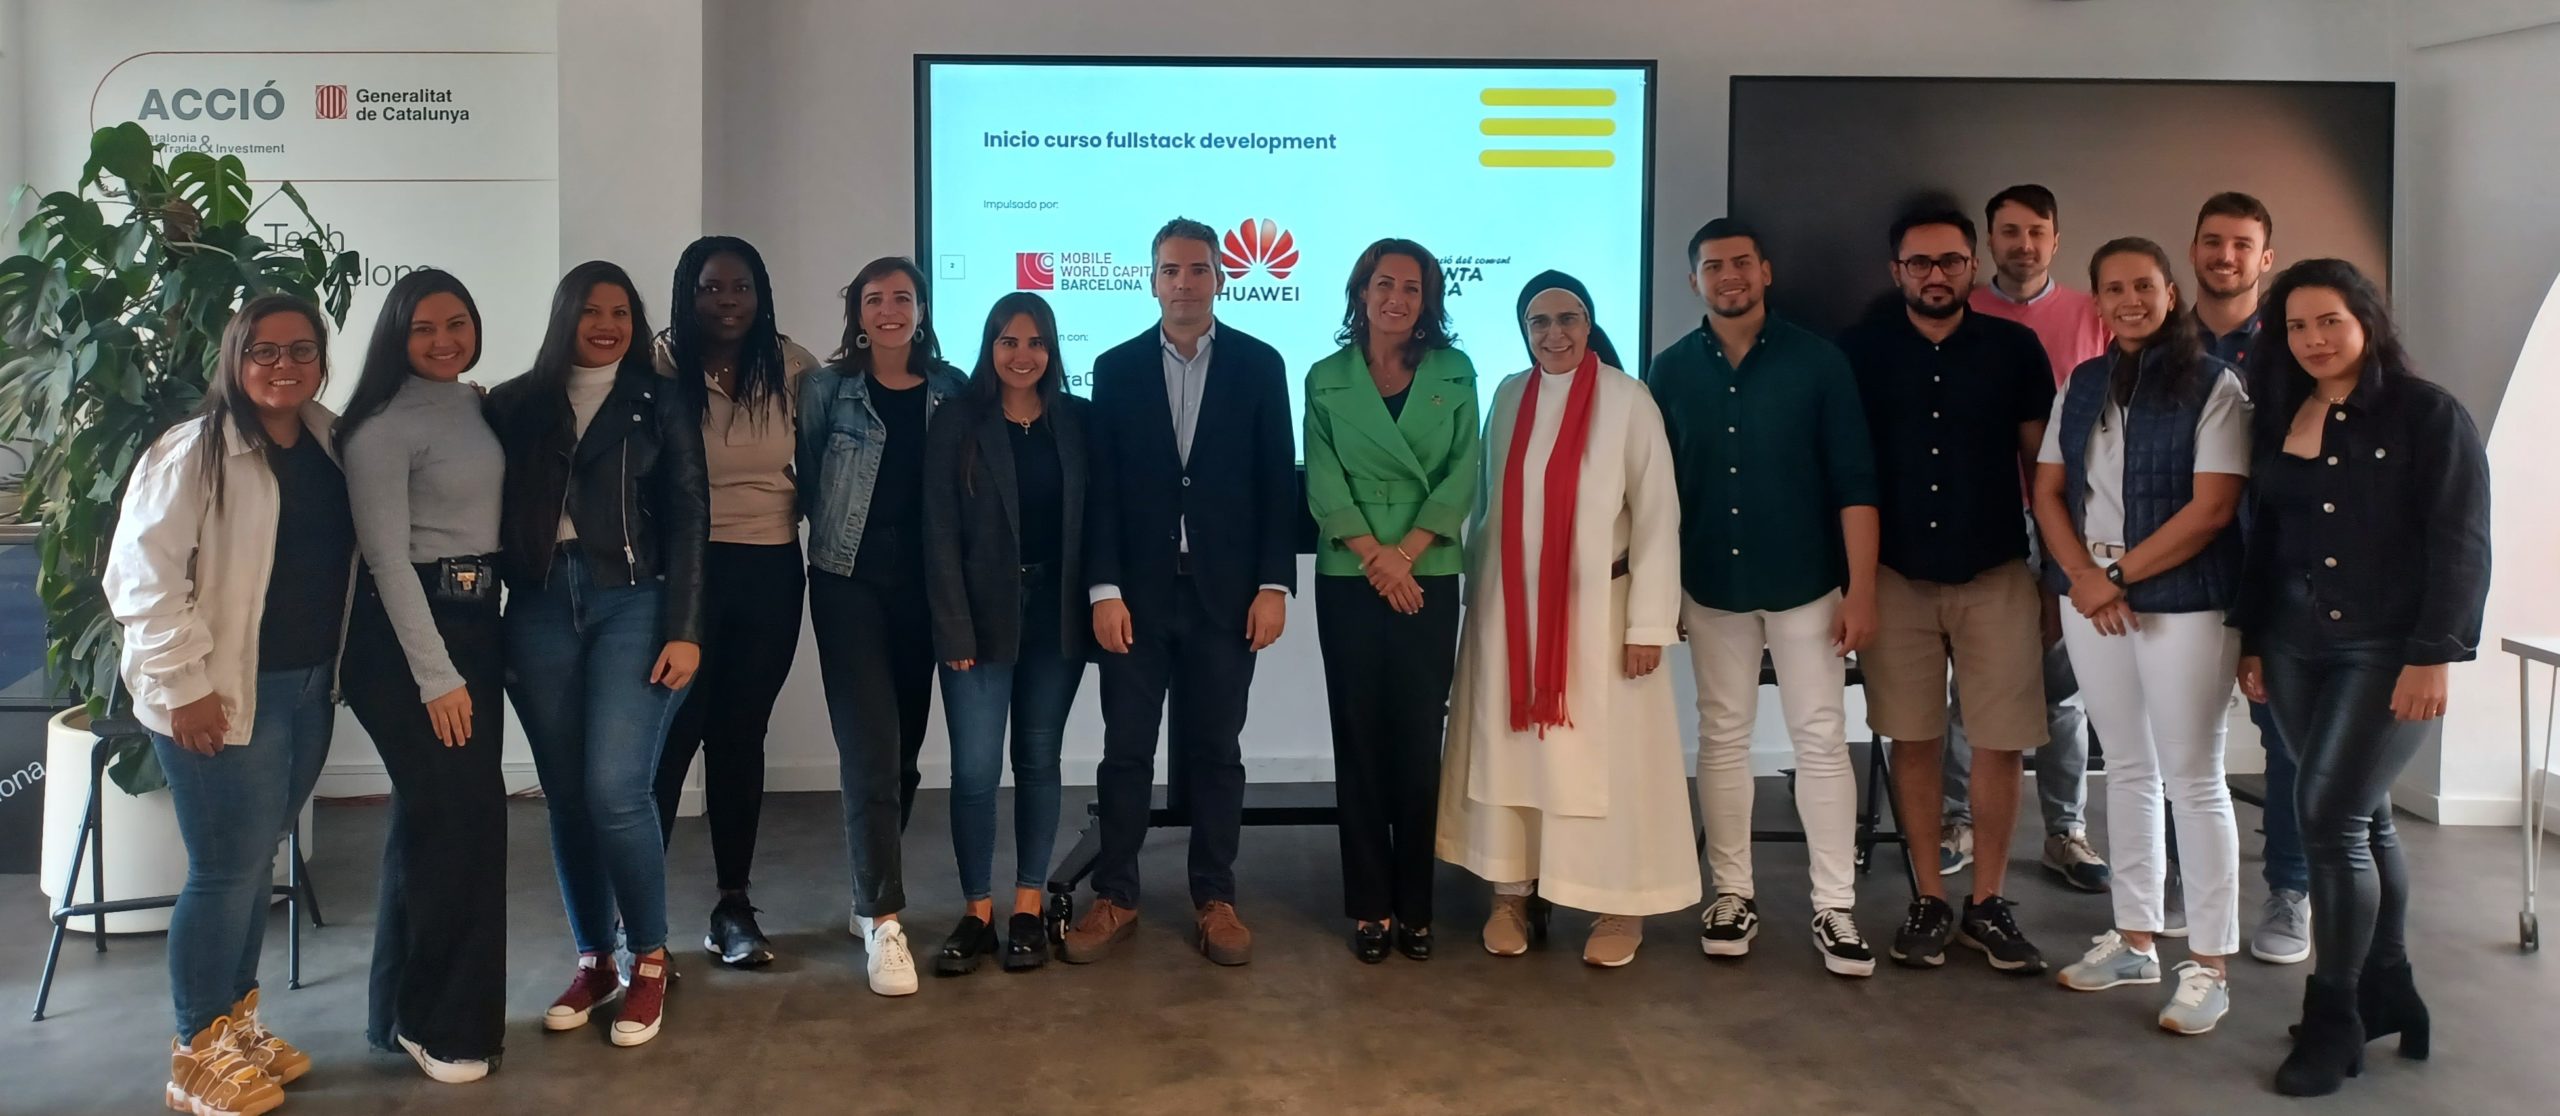 Mobile World Capital Barcelona and Huawei start Fullstack Development, a course aimed at promoting technological training of vulnerable populations